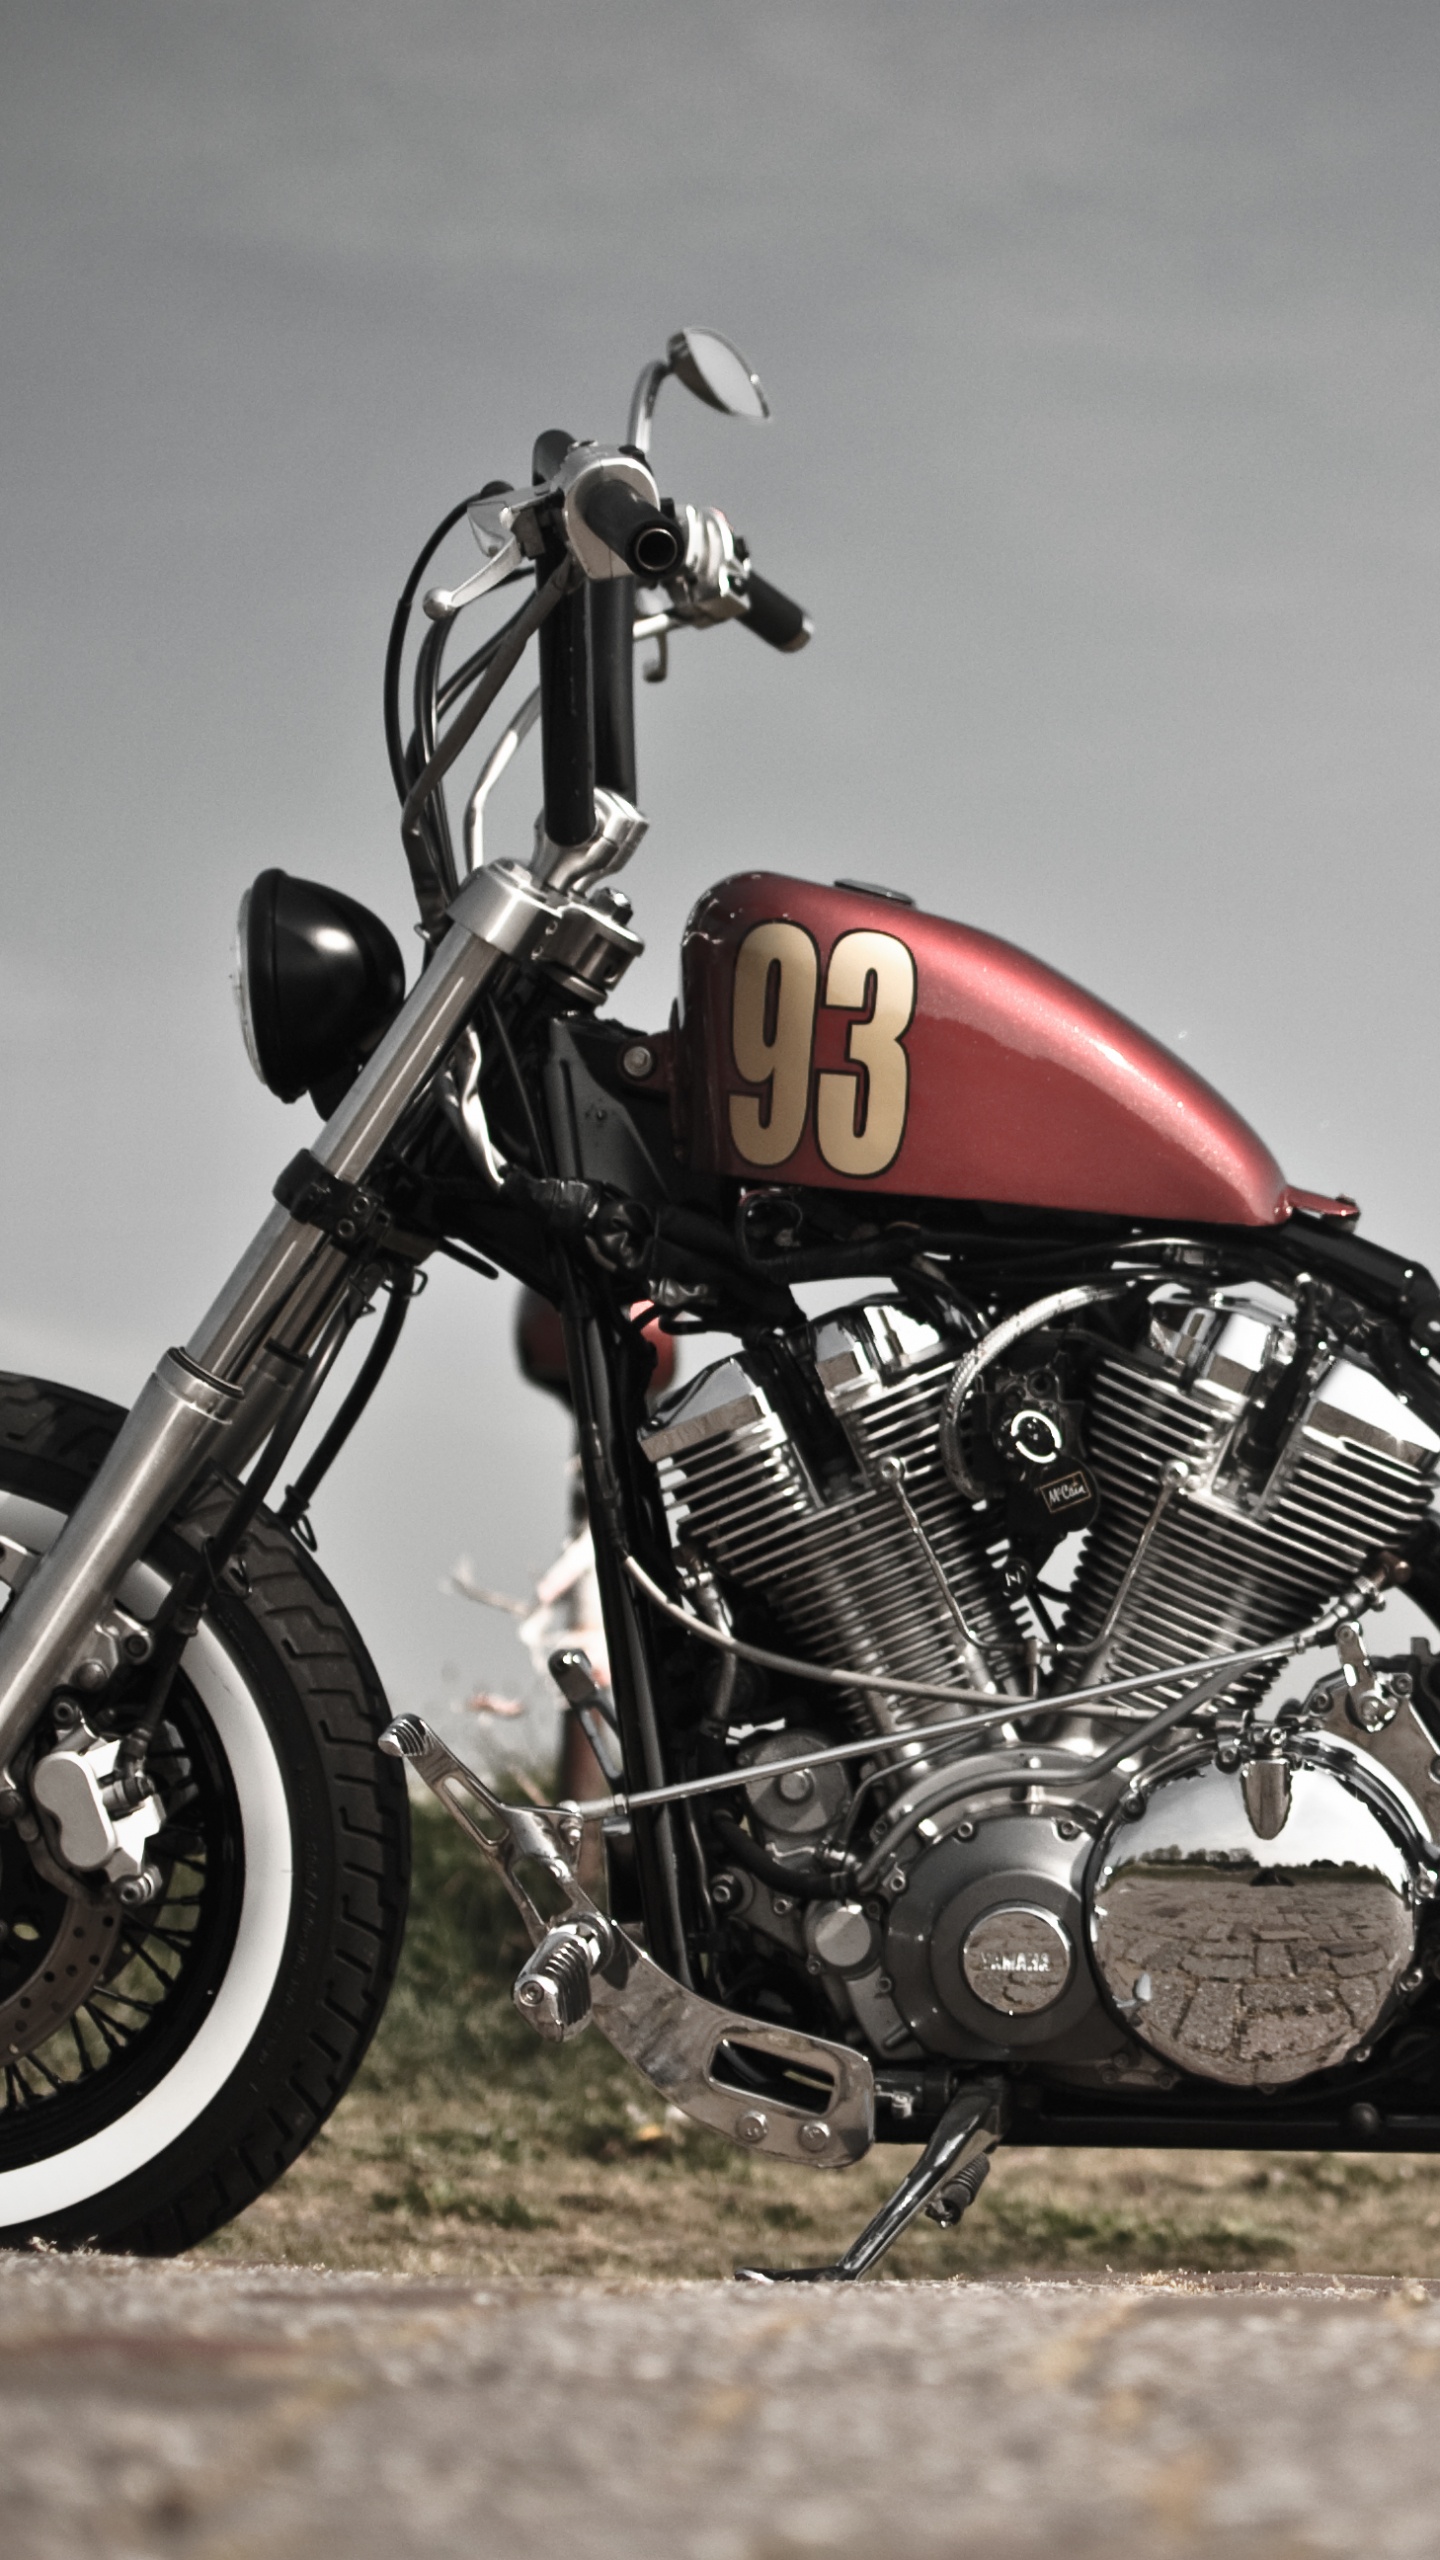 Red and Black Motorcycle on Brown Field. Wallpaper in 1440x2560 Resolution